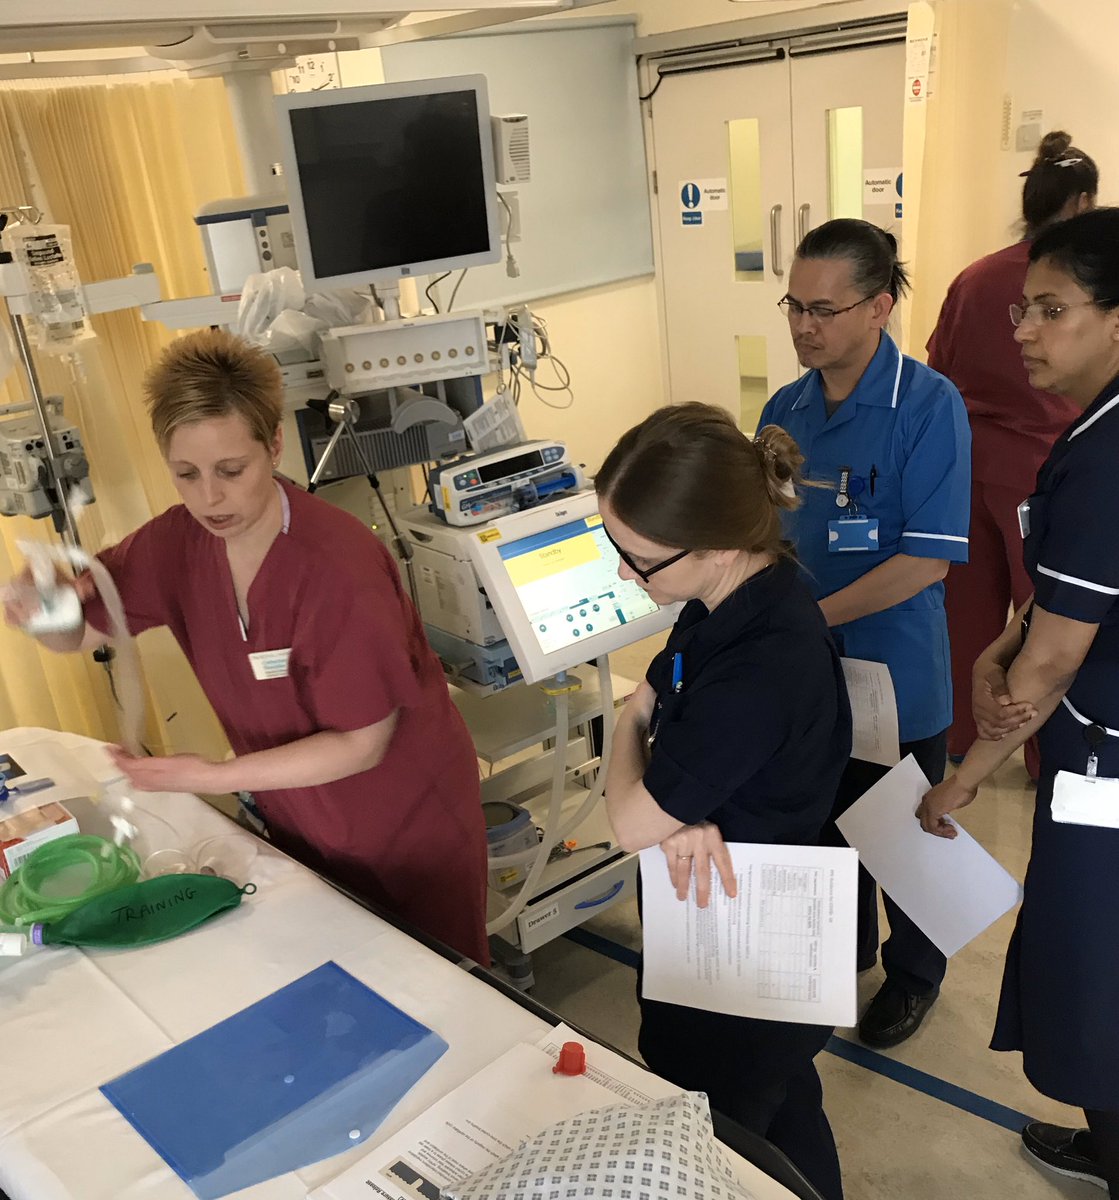 The CCU #practiceeducation team @royalmarsdenNHS have put together a fantastic #teaching package of #essentialskills for those who have previous experience and for ward based staff. In a very short space of time. Seriously this is impressive, I am awe. #wecandothis 😍 #Covid_19